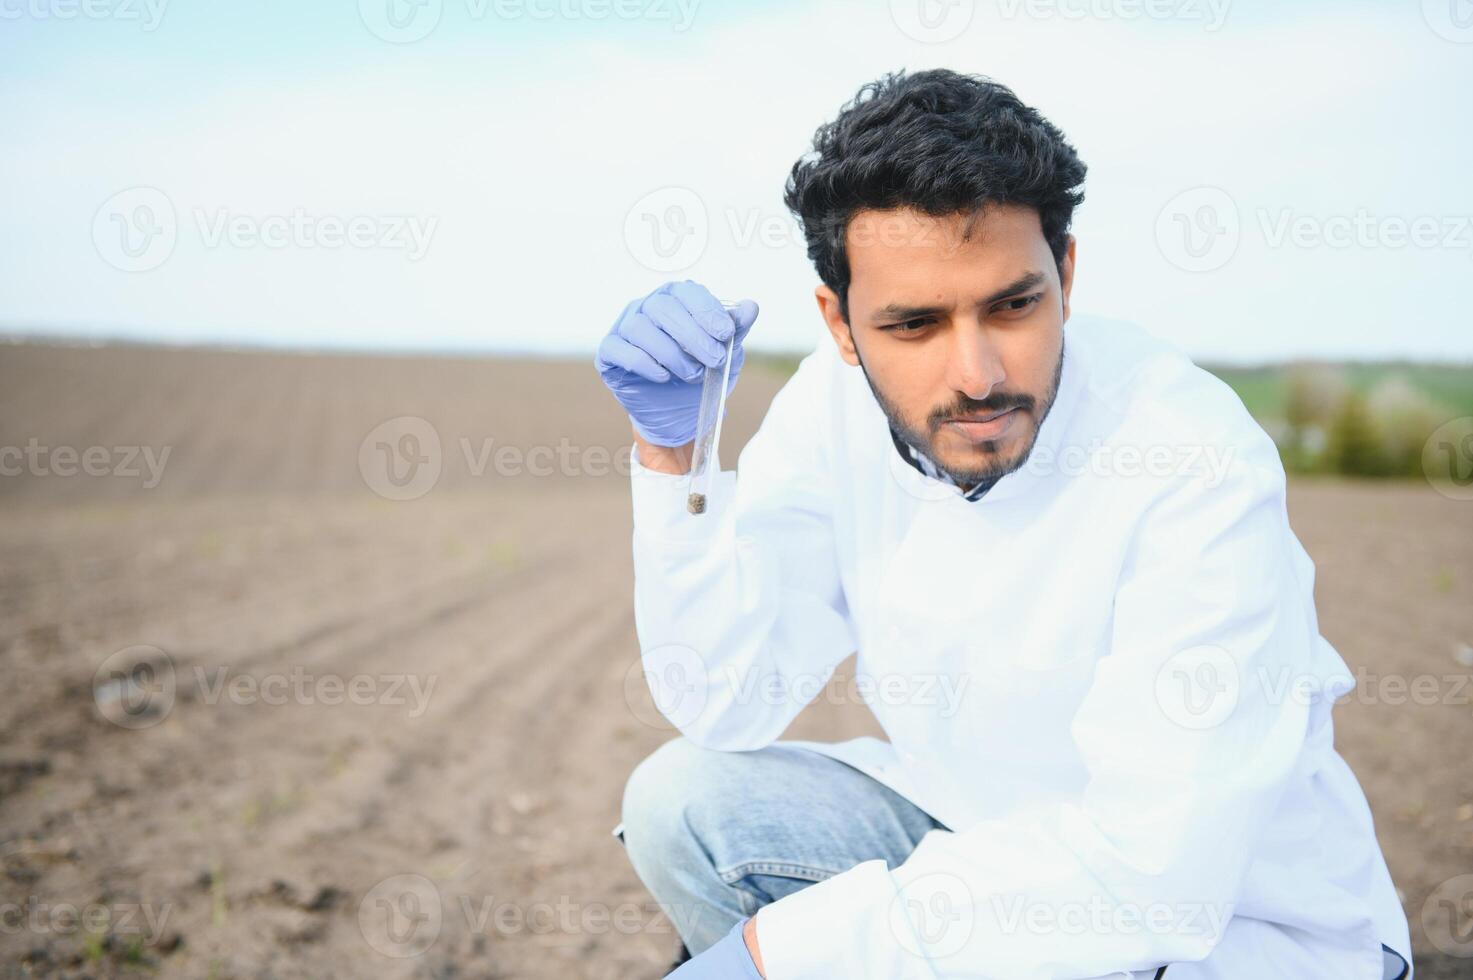 Soil Testing. Indian Agronomy Specialist taking soil sample for fertility analysis. Hands in gloves close up. Environmental protection, organic soil certification, field work, research photo